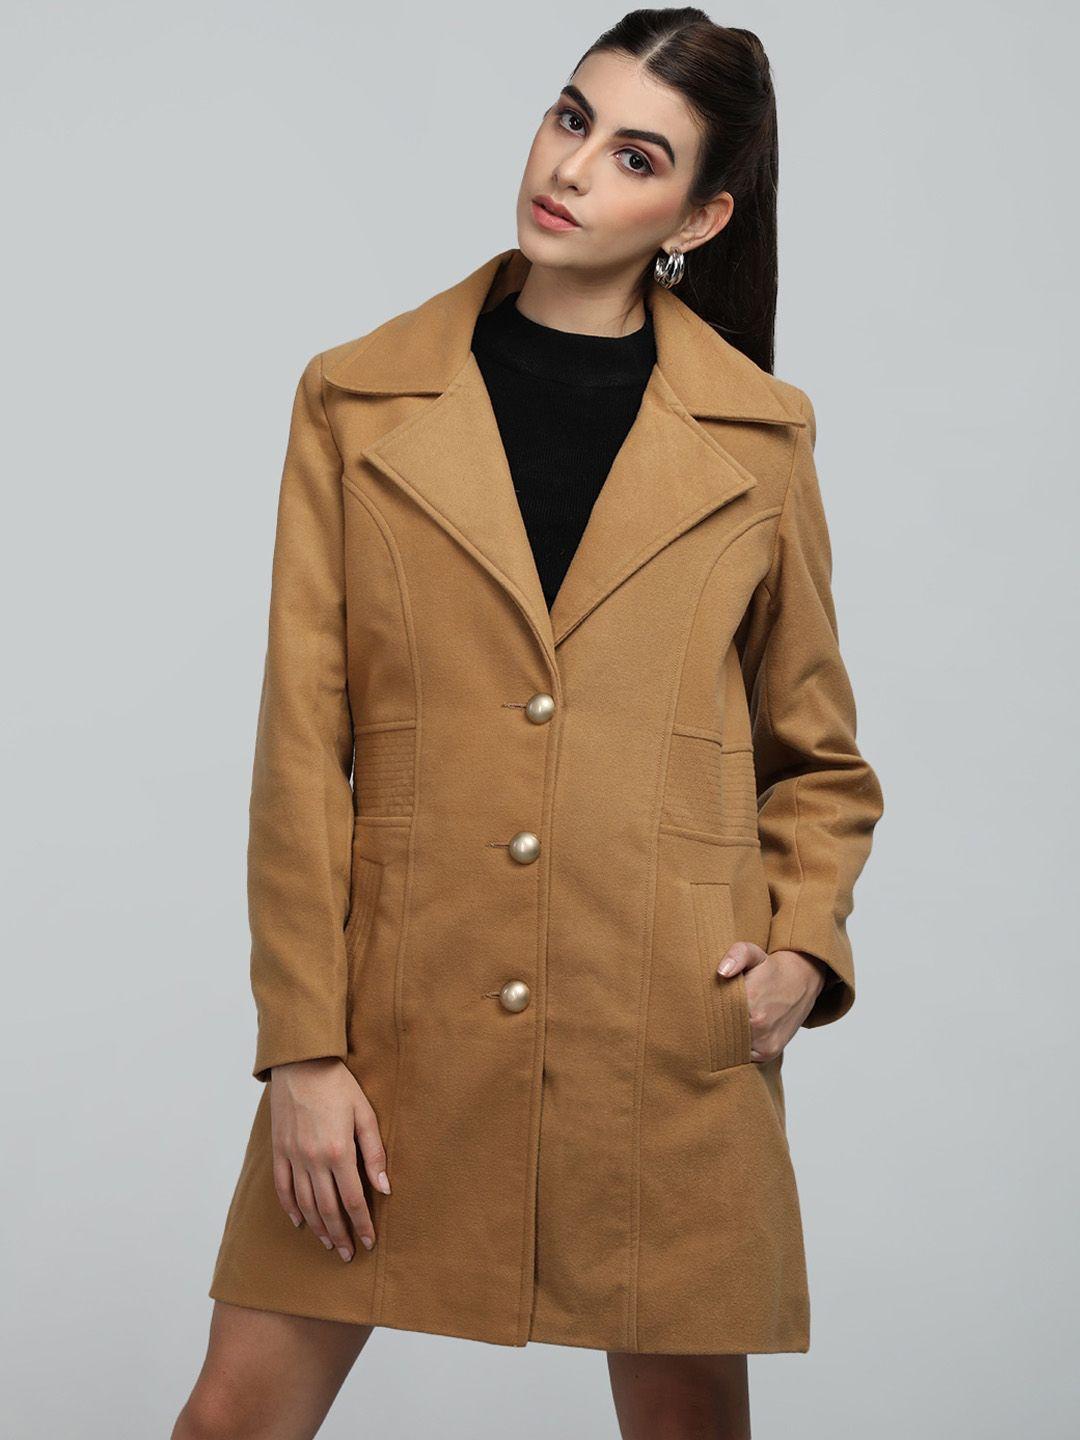 chkokko single breasted notched lapel collar woolen overcoat